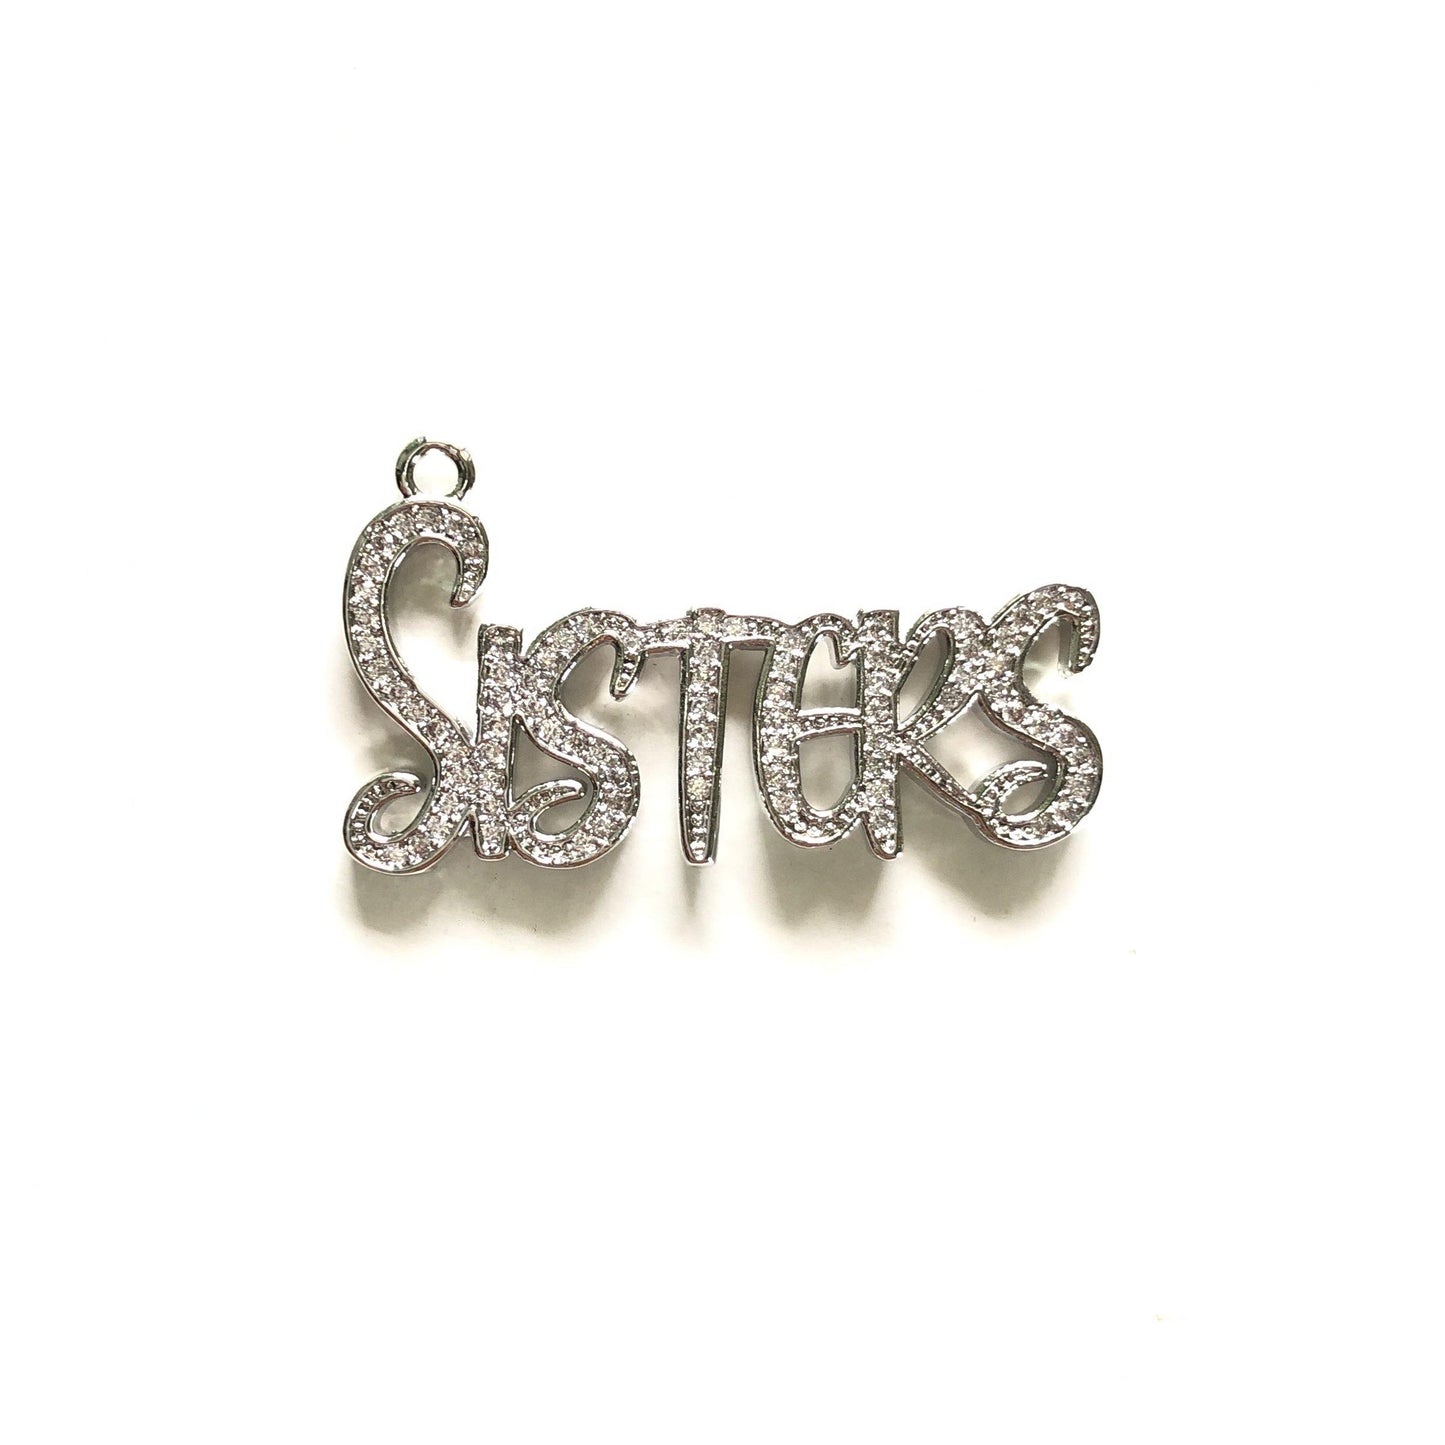 10pcs/lot 34.5*20mm CZ Paved Sisters Charms Silver CZ Paved Charms Words & Quotes Charms Beads Beyond